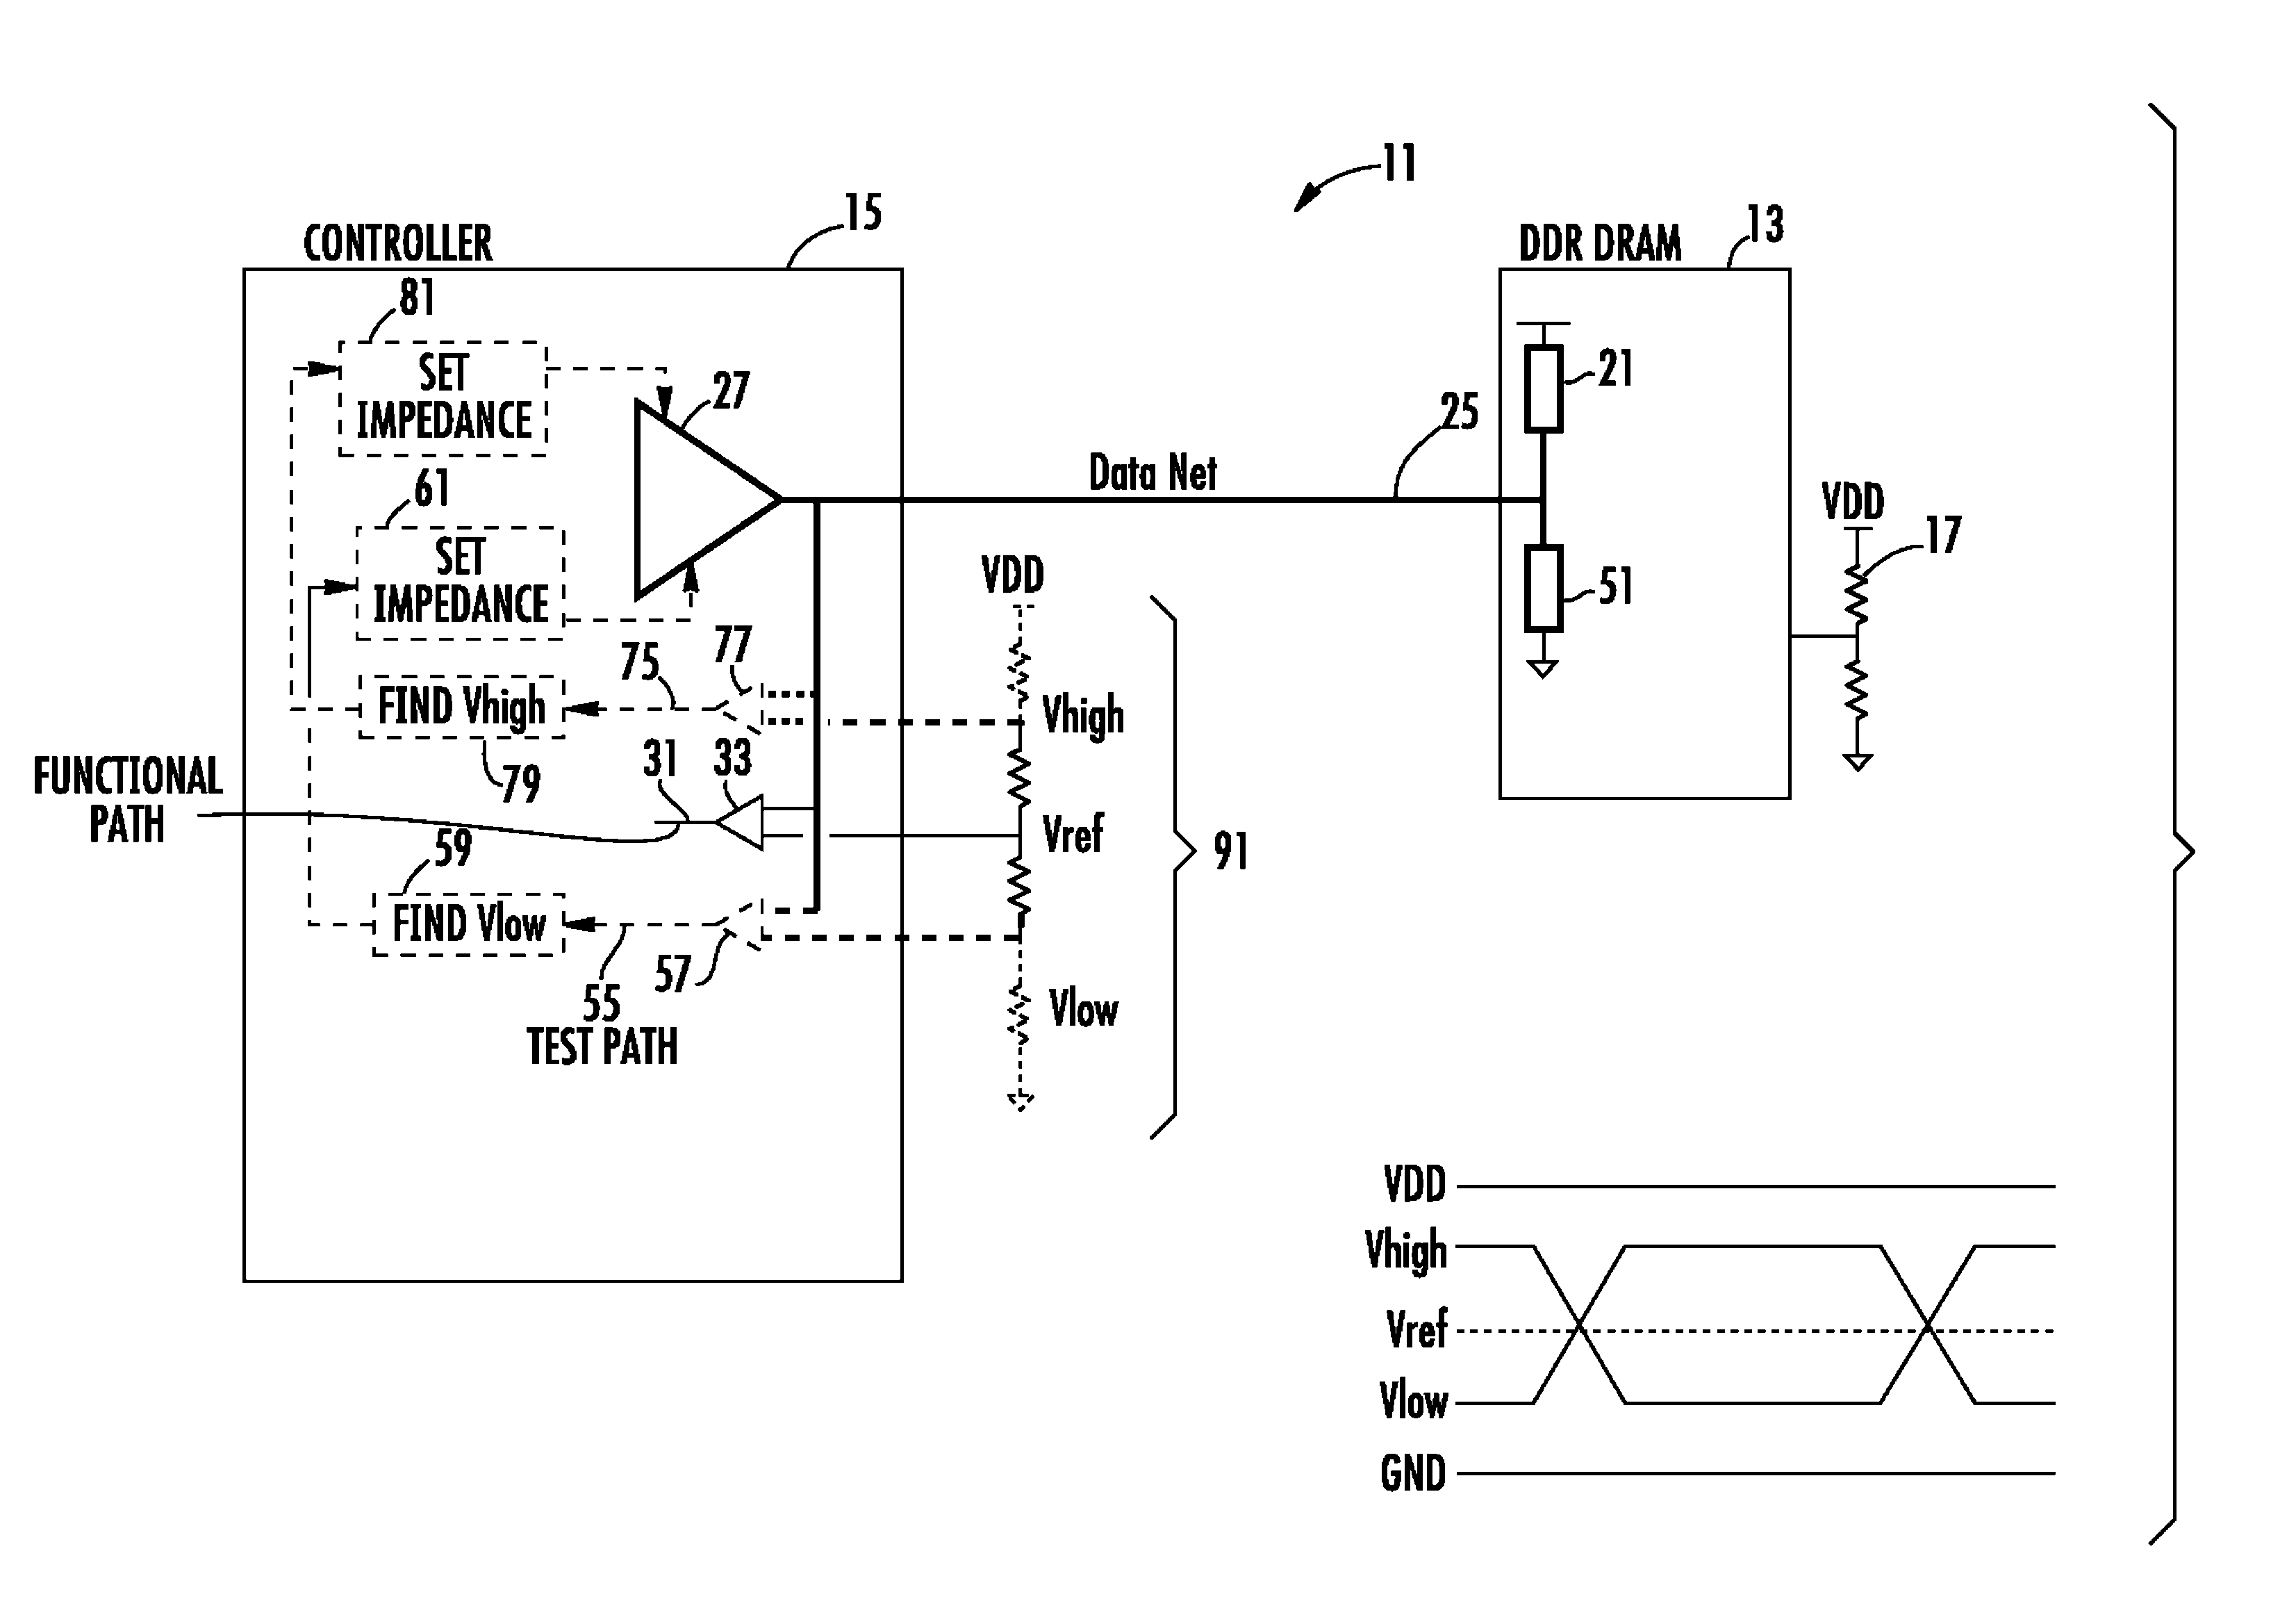 Setting memory controller driver to memory device termination value in a communication bus